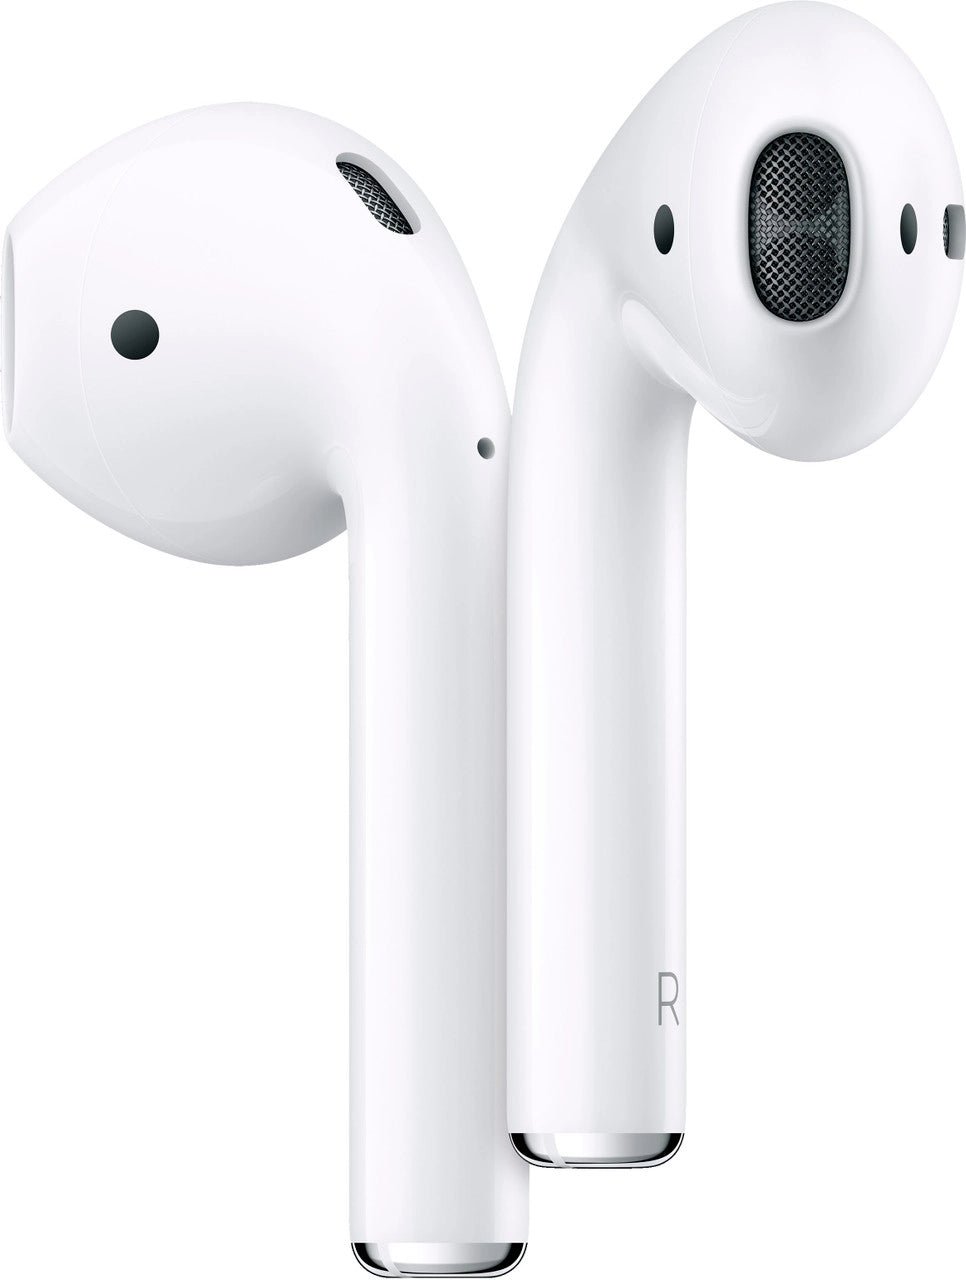 Apple - Air Pods with Charging Case -2nd Generation - White - A Horizon Dawn